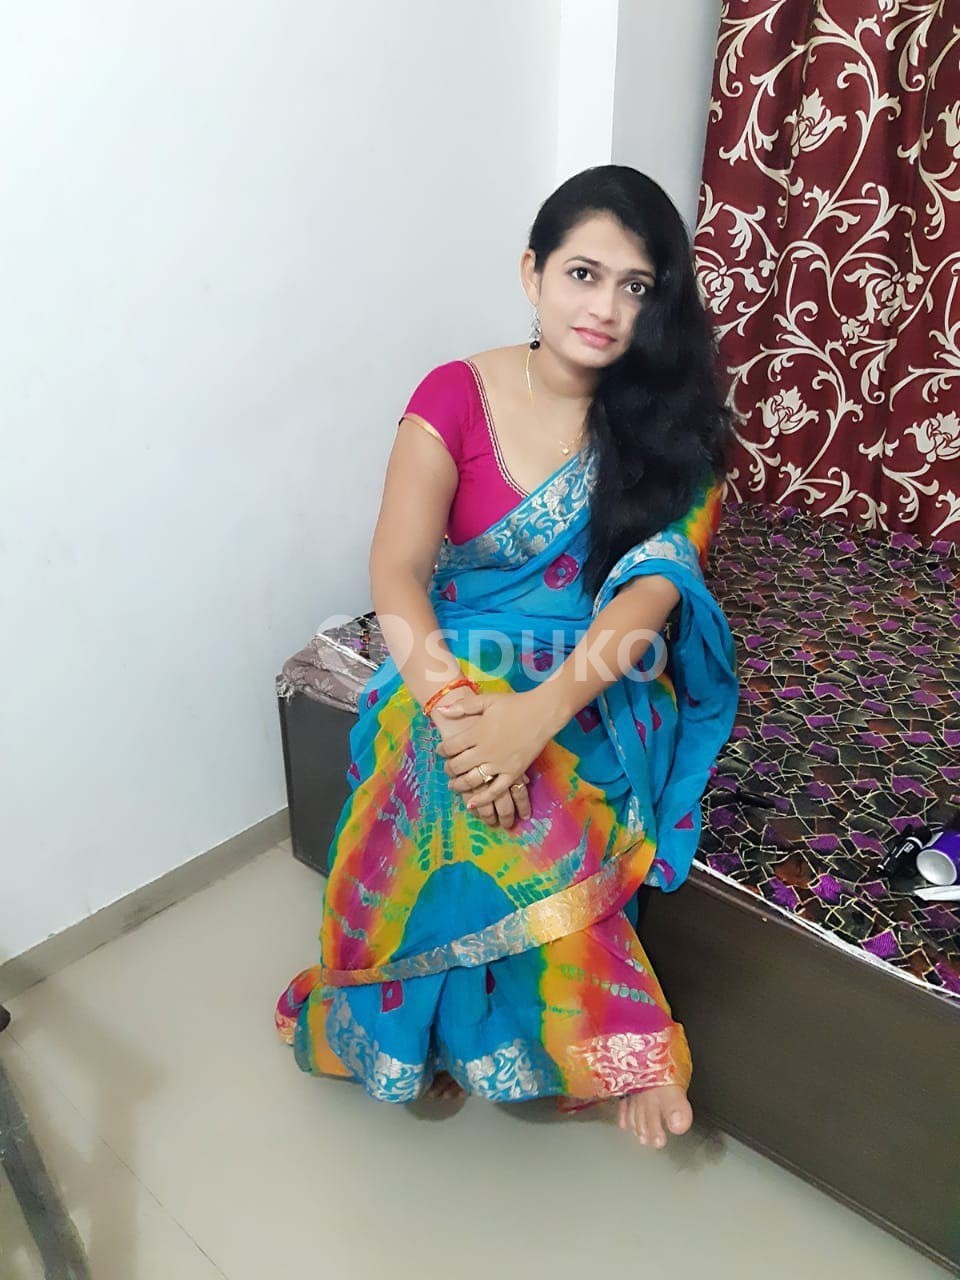 Panipat myself Malika 💯% satisfied call girl service full safe and secure service ..24 /7 available